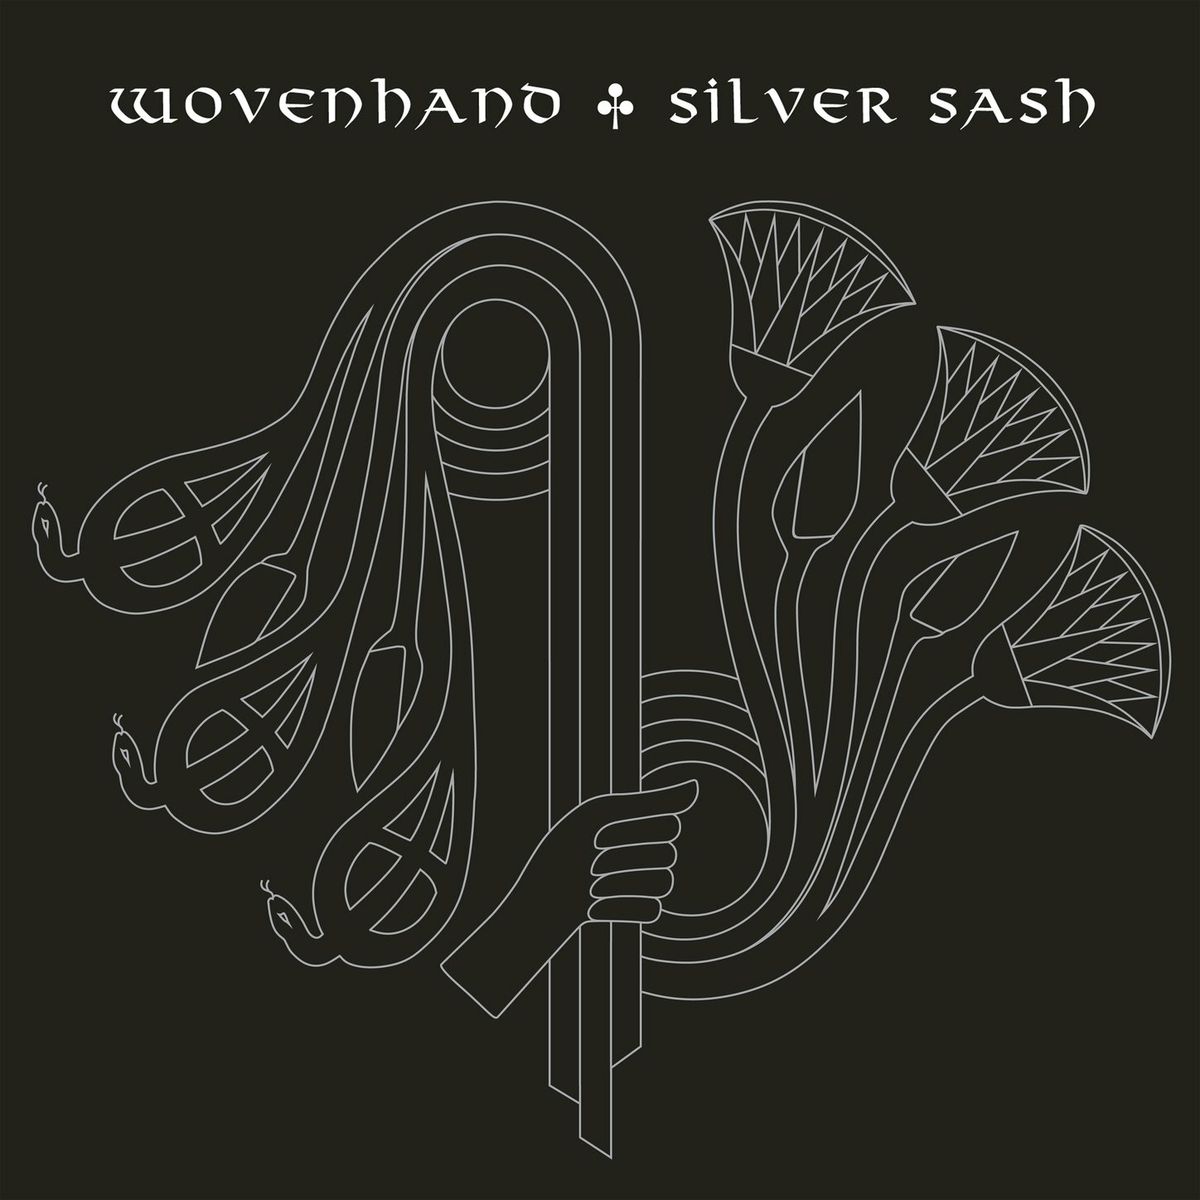 Woven Hand - Albums Collection Flac 2002 - 2022